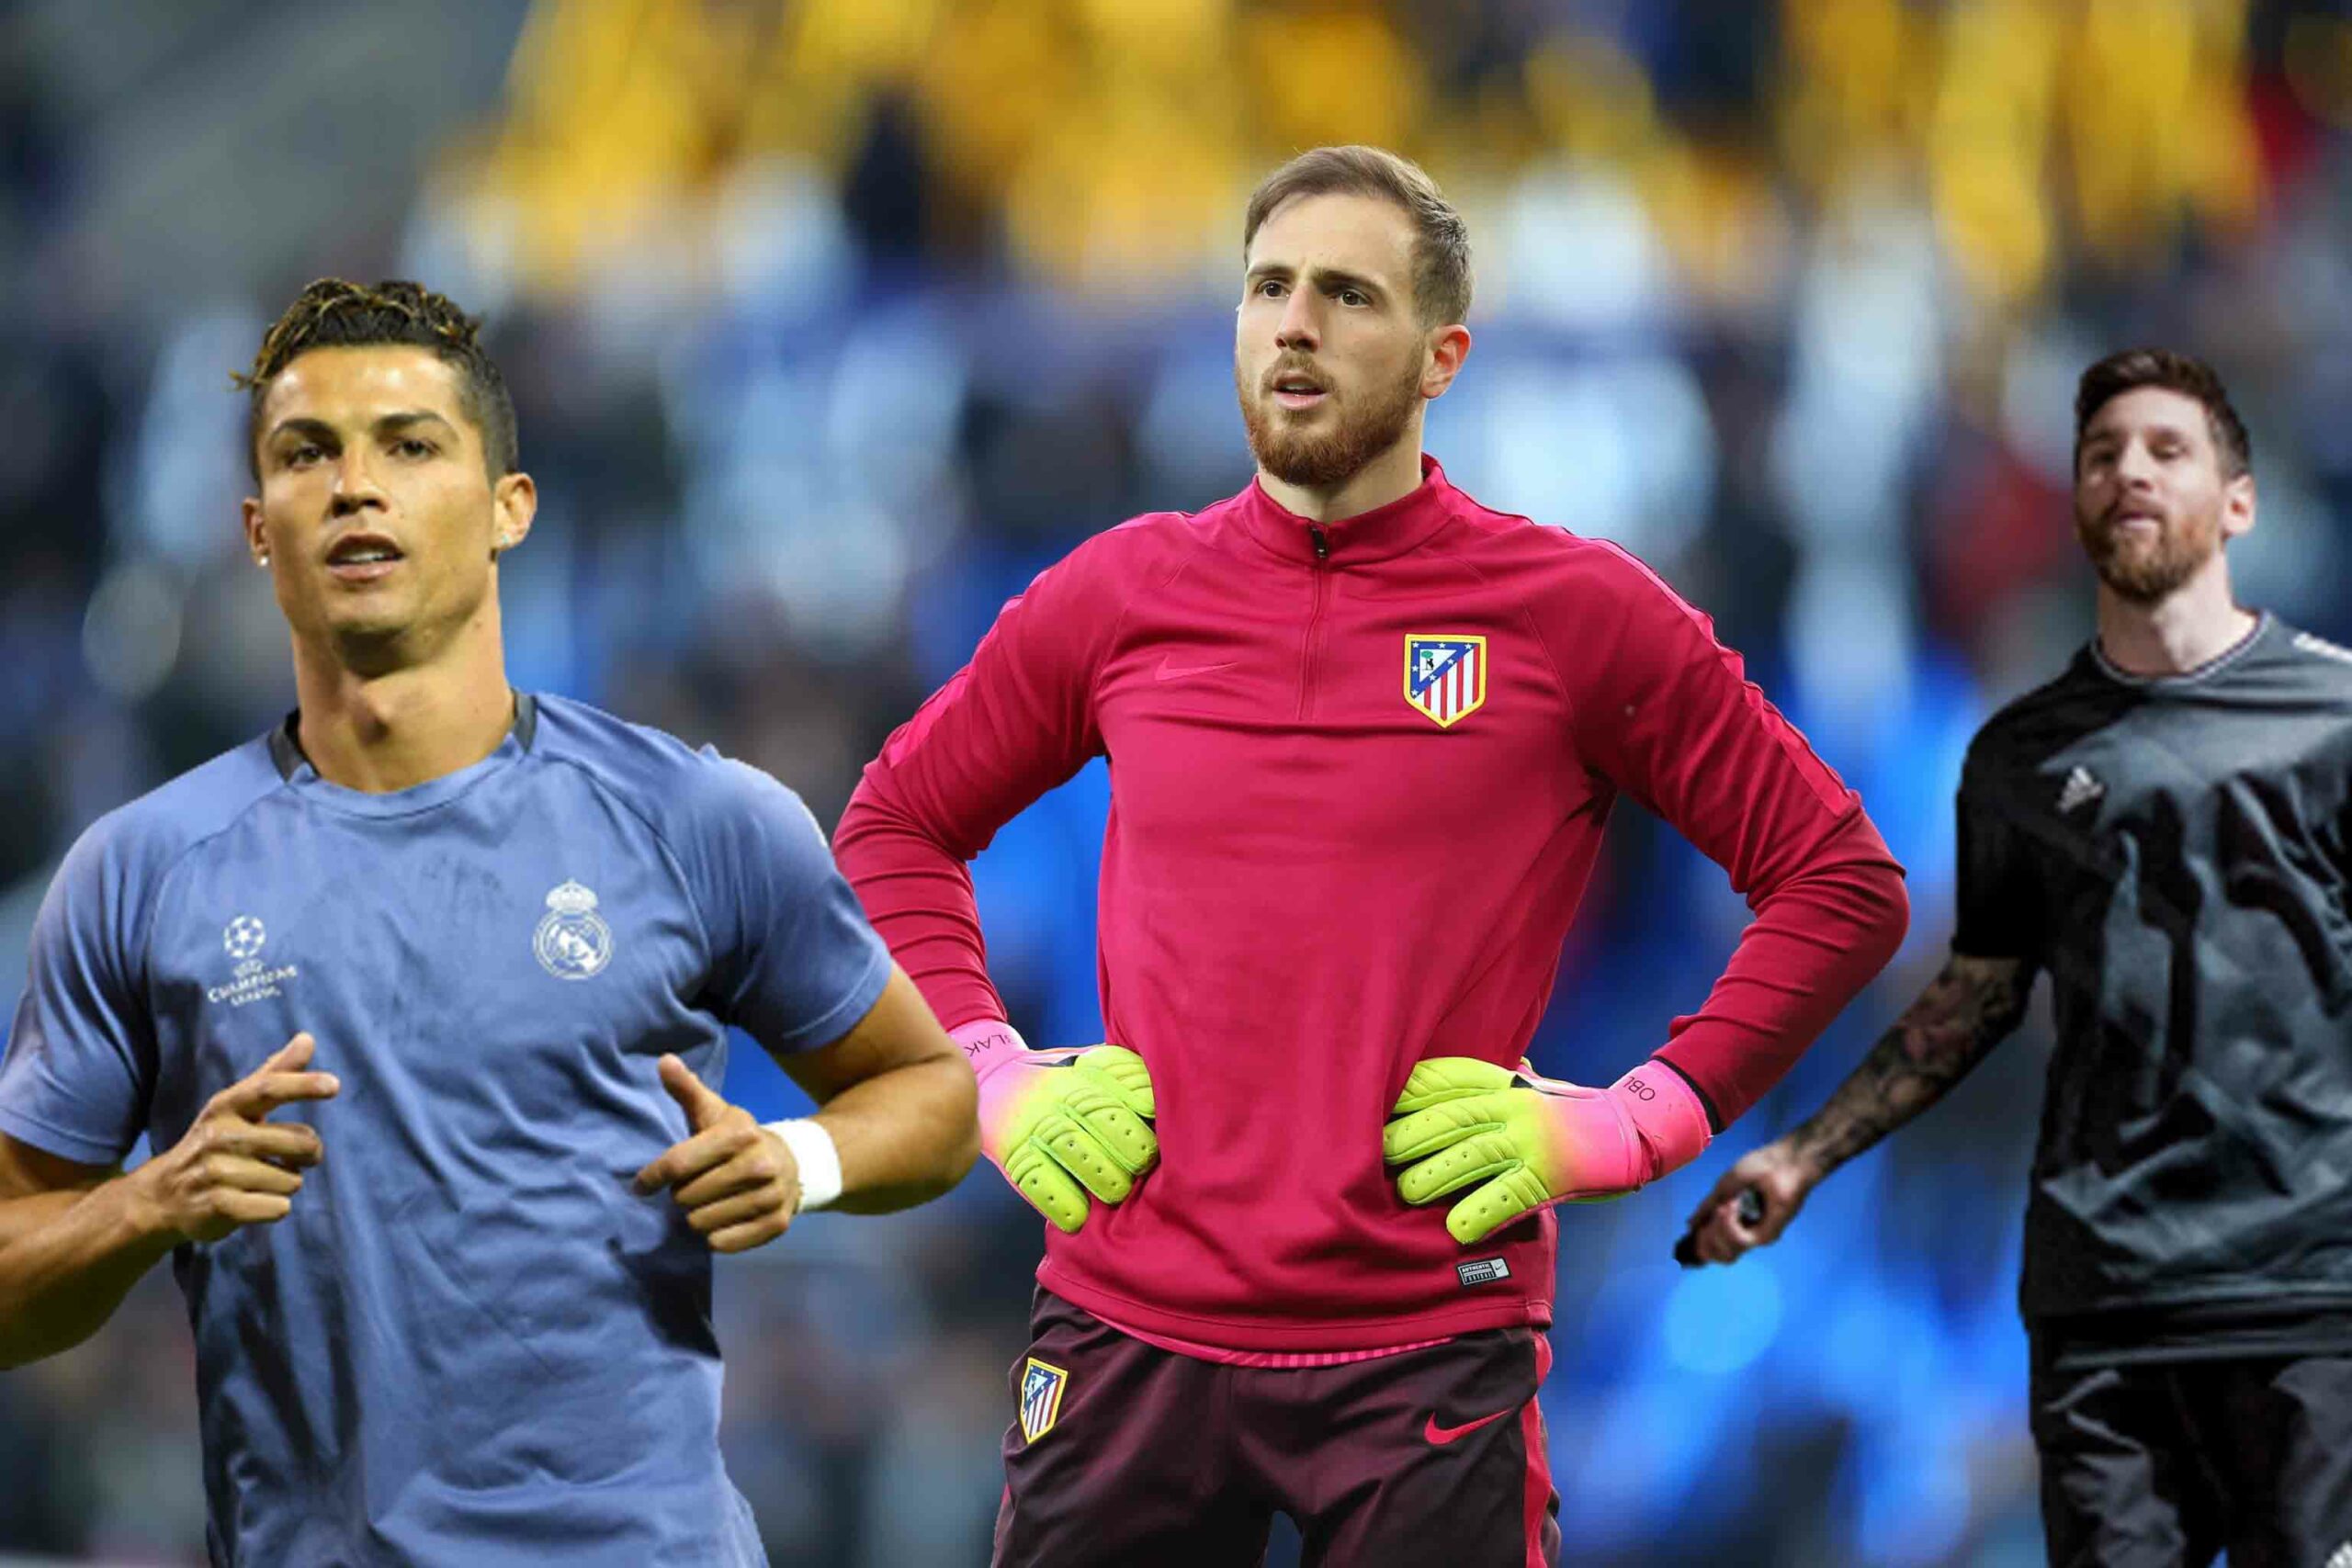 Jan Oblak Messi is the best. He and Ronaldo ushered in an era, what they have achieved is amazing